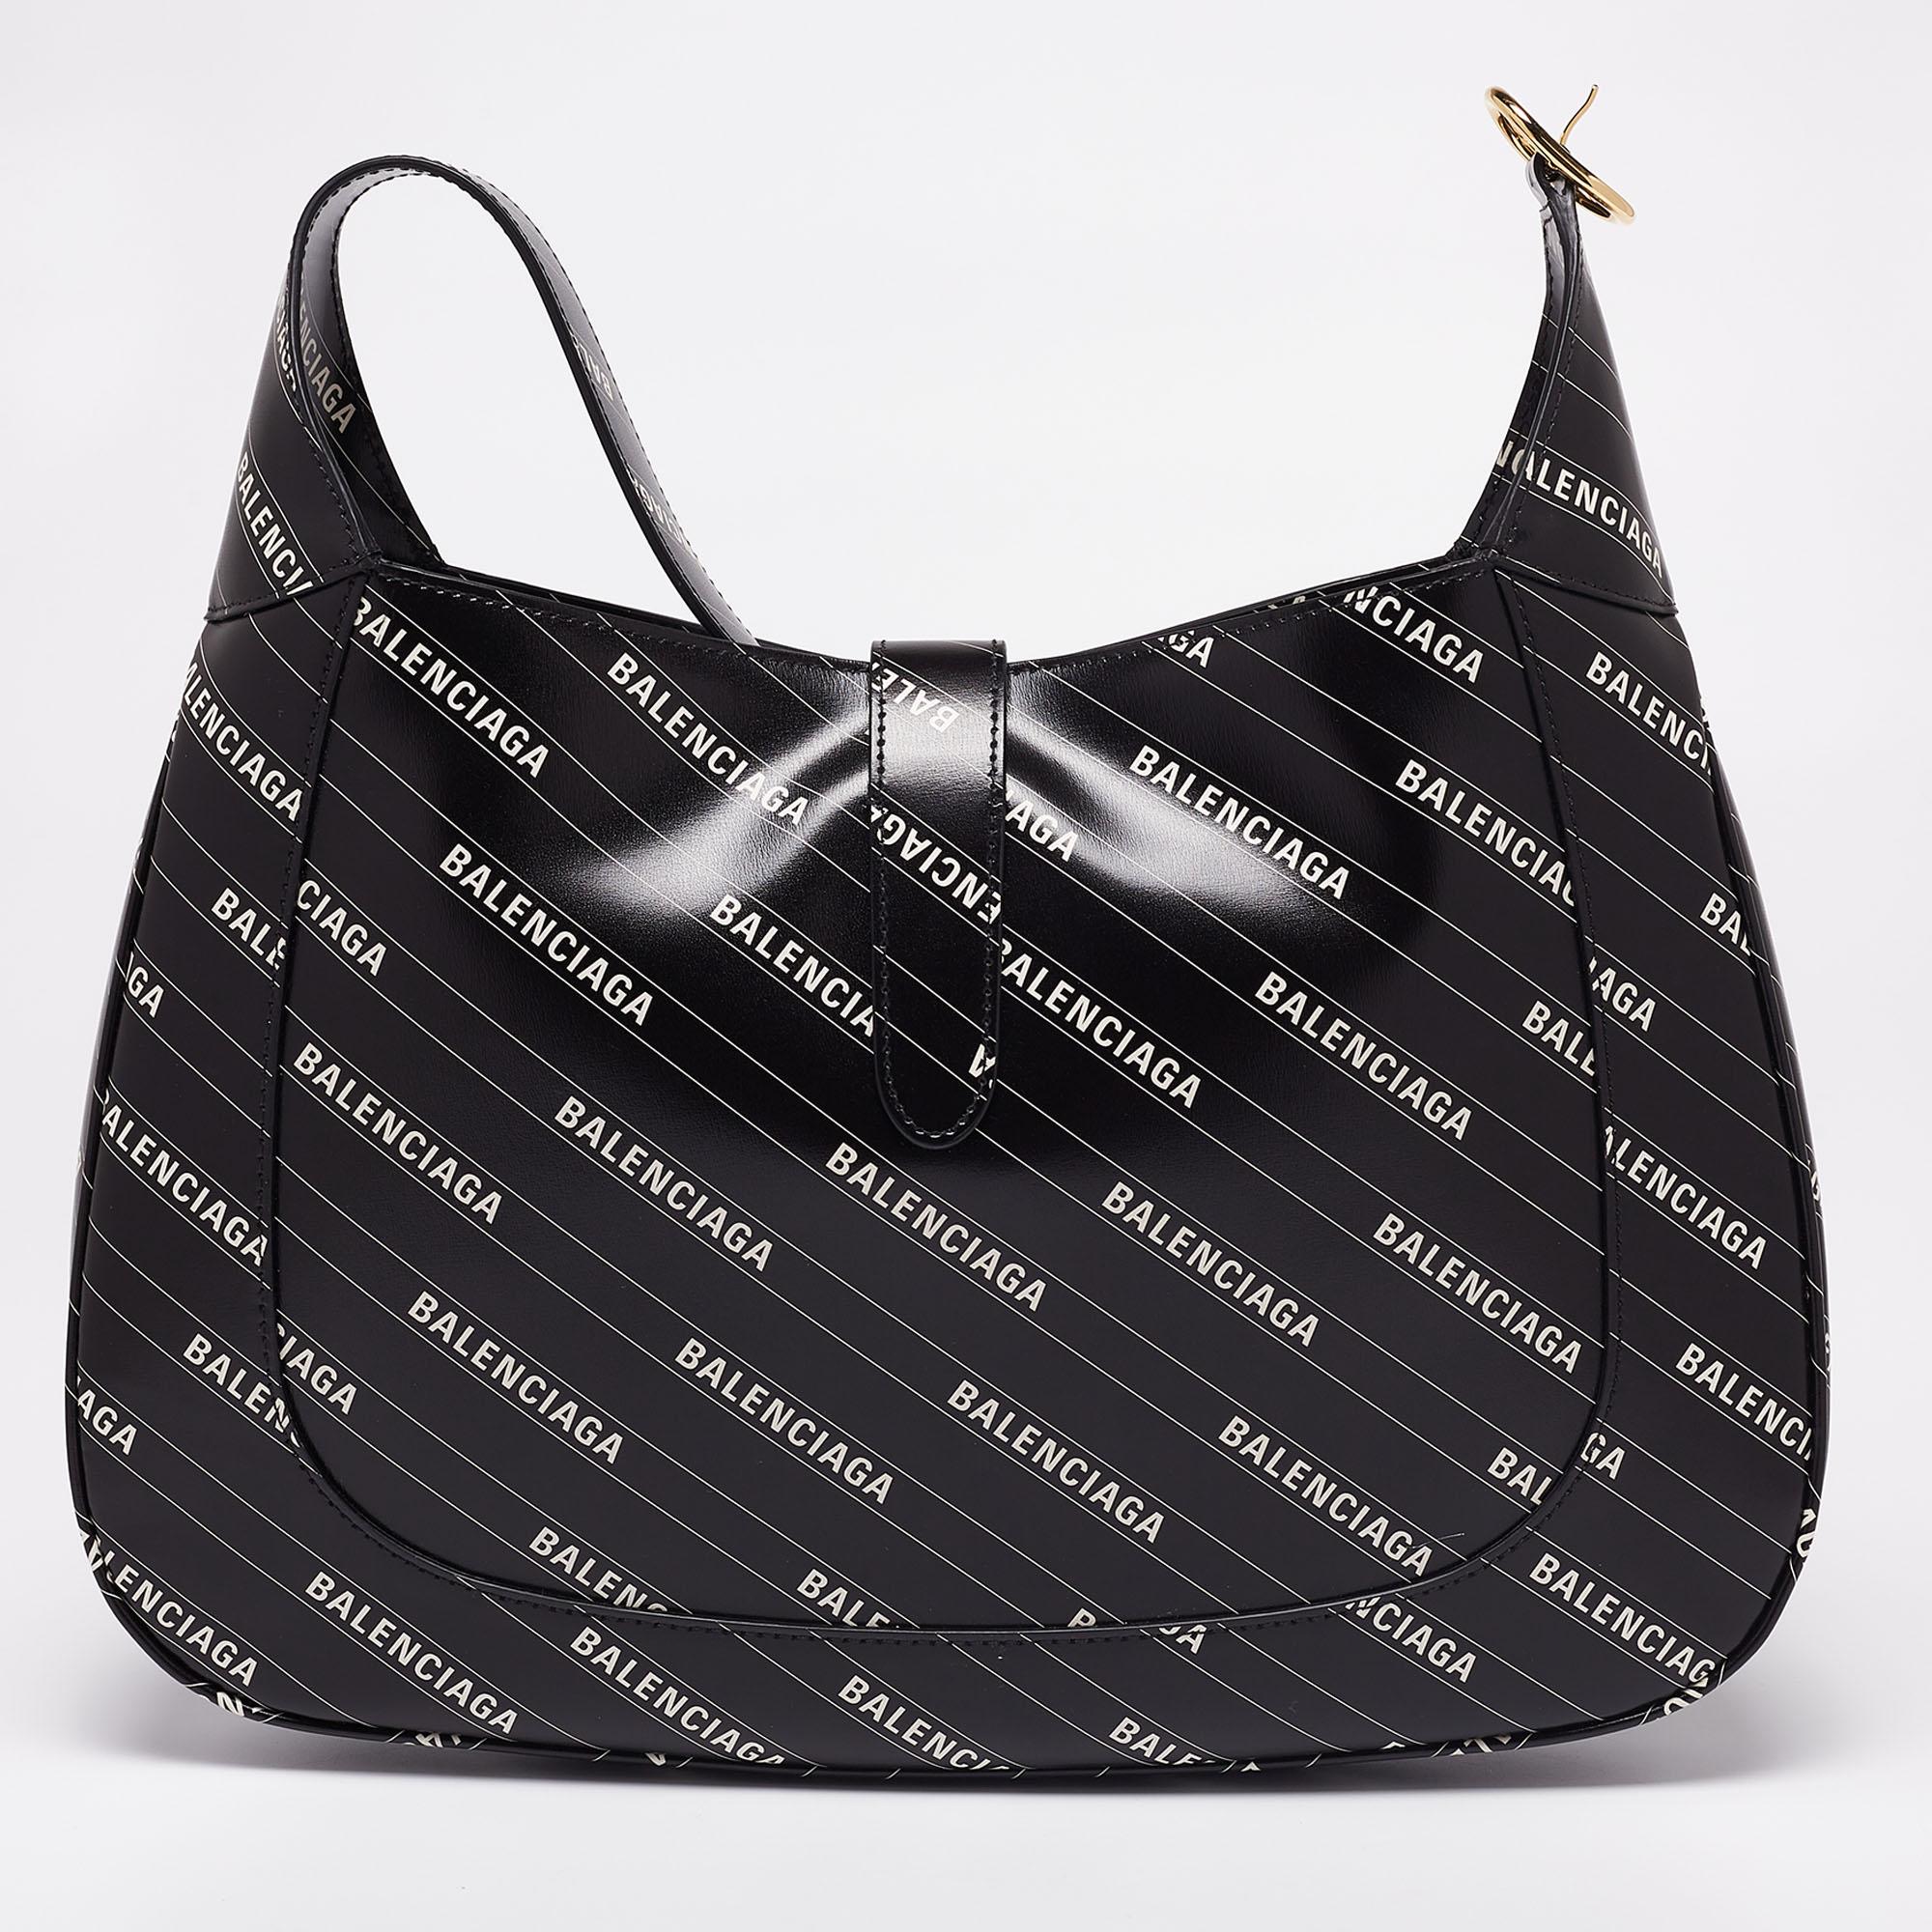 Shaped into a distinctively unique silhouette, this Jackie hobo from Gucci x Balenciaga will forever remain an iconic creation that will leave an imprint on your mind. It is made from black logo-printed leather, with the signature lock closure